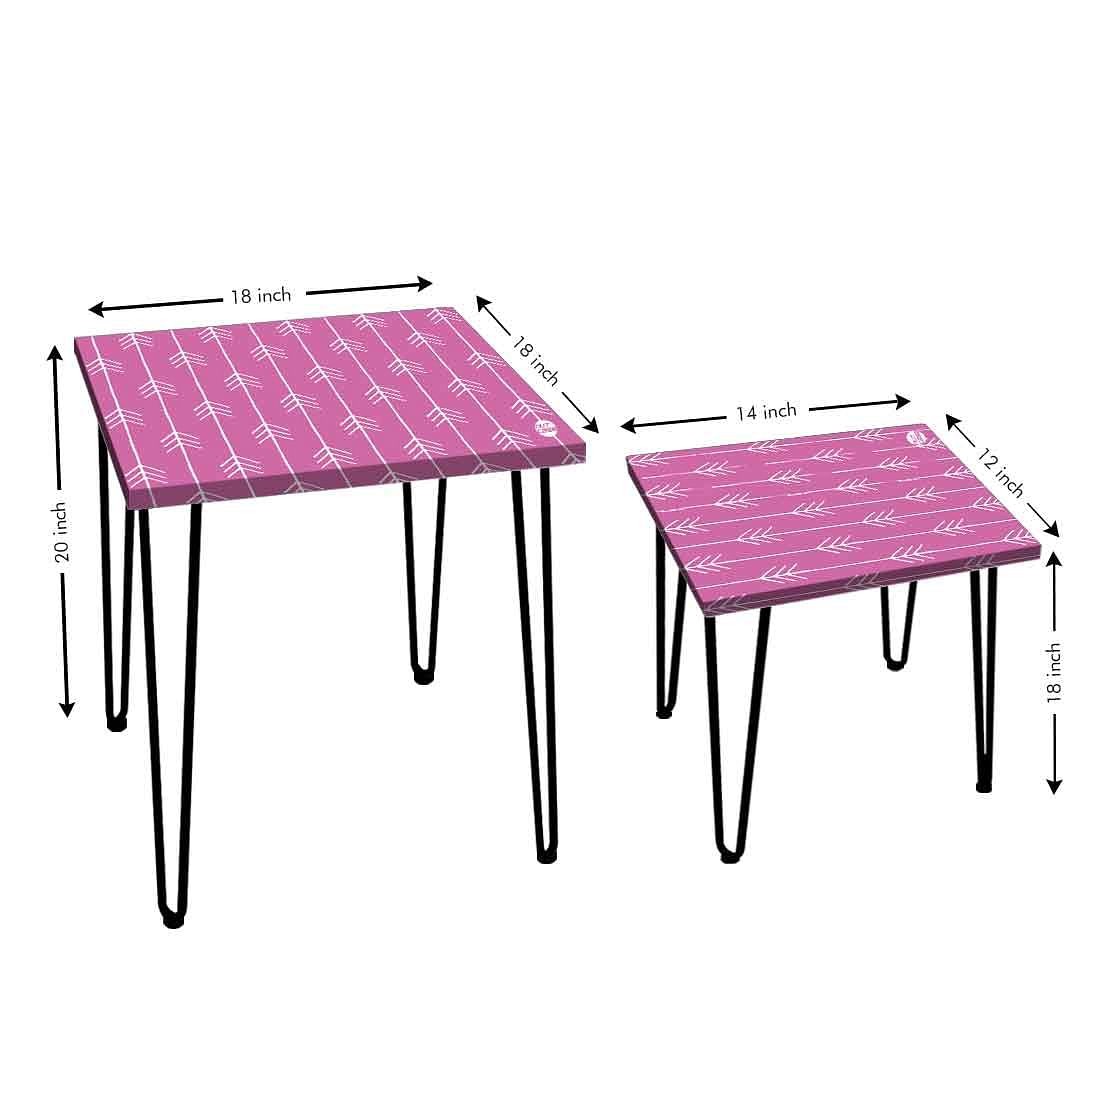 Multi-purpose Set Of 2 Metal Nest of Tables for Home and Outdoor - Purple Arrow End Nutcase